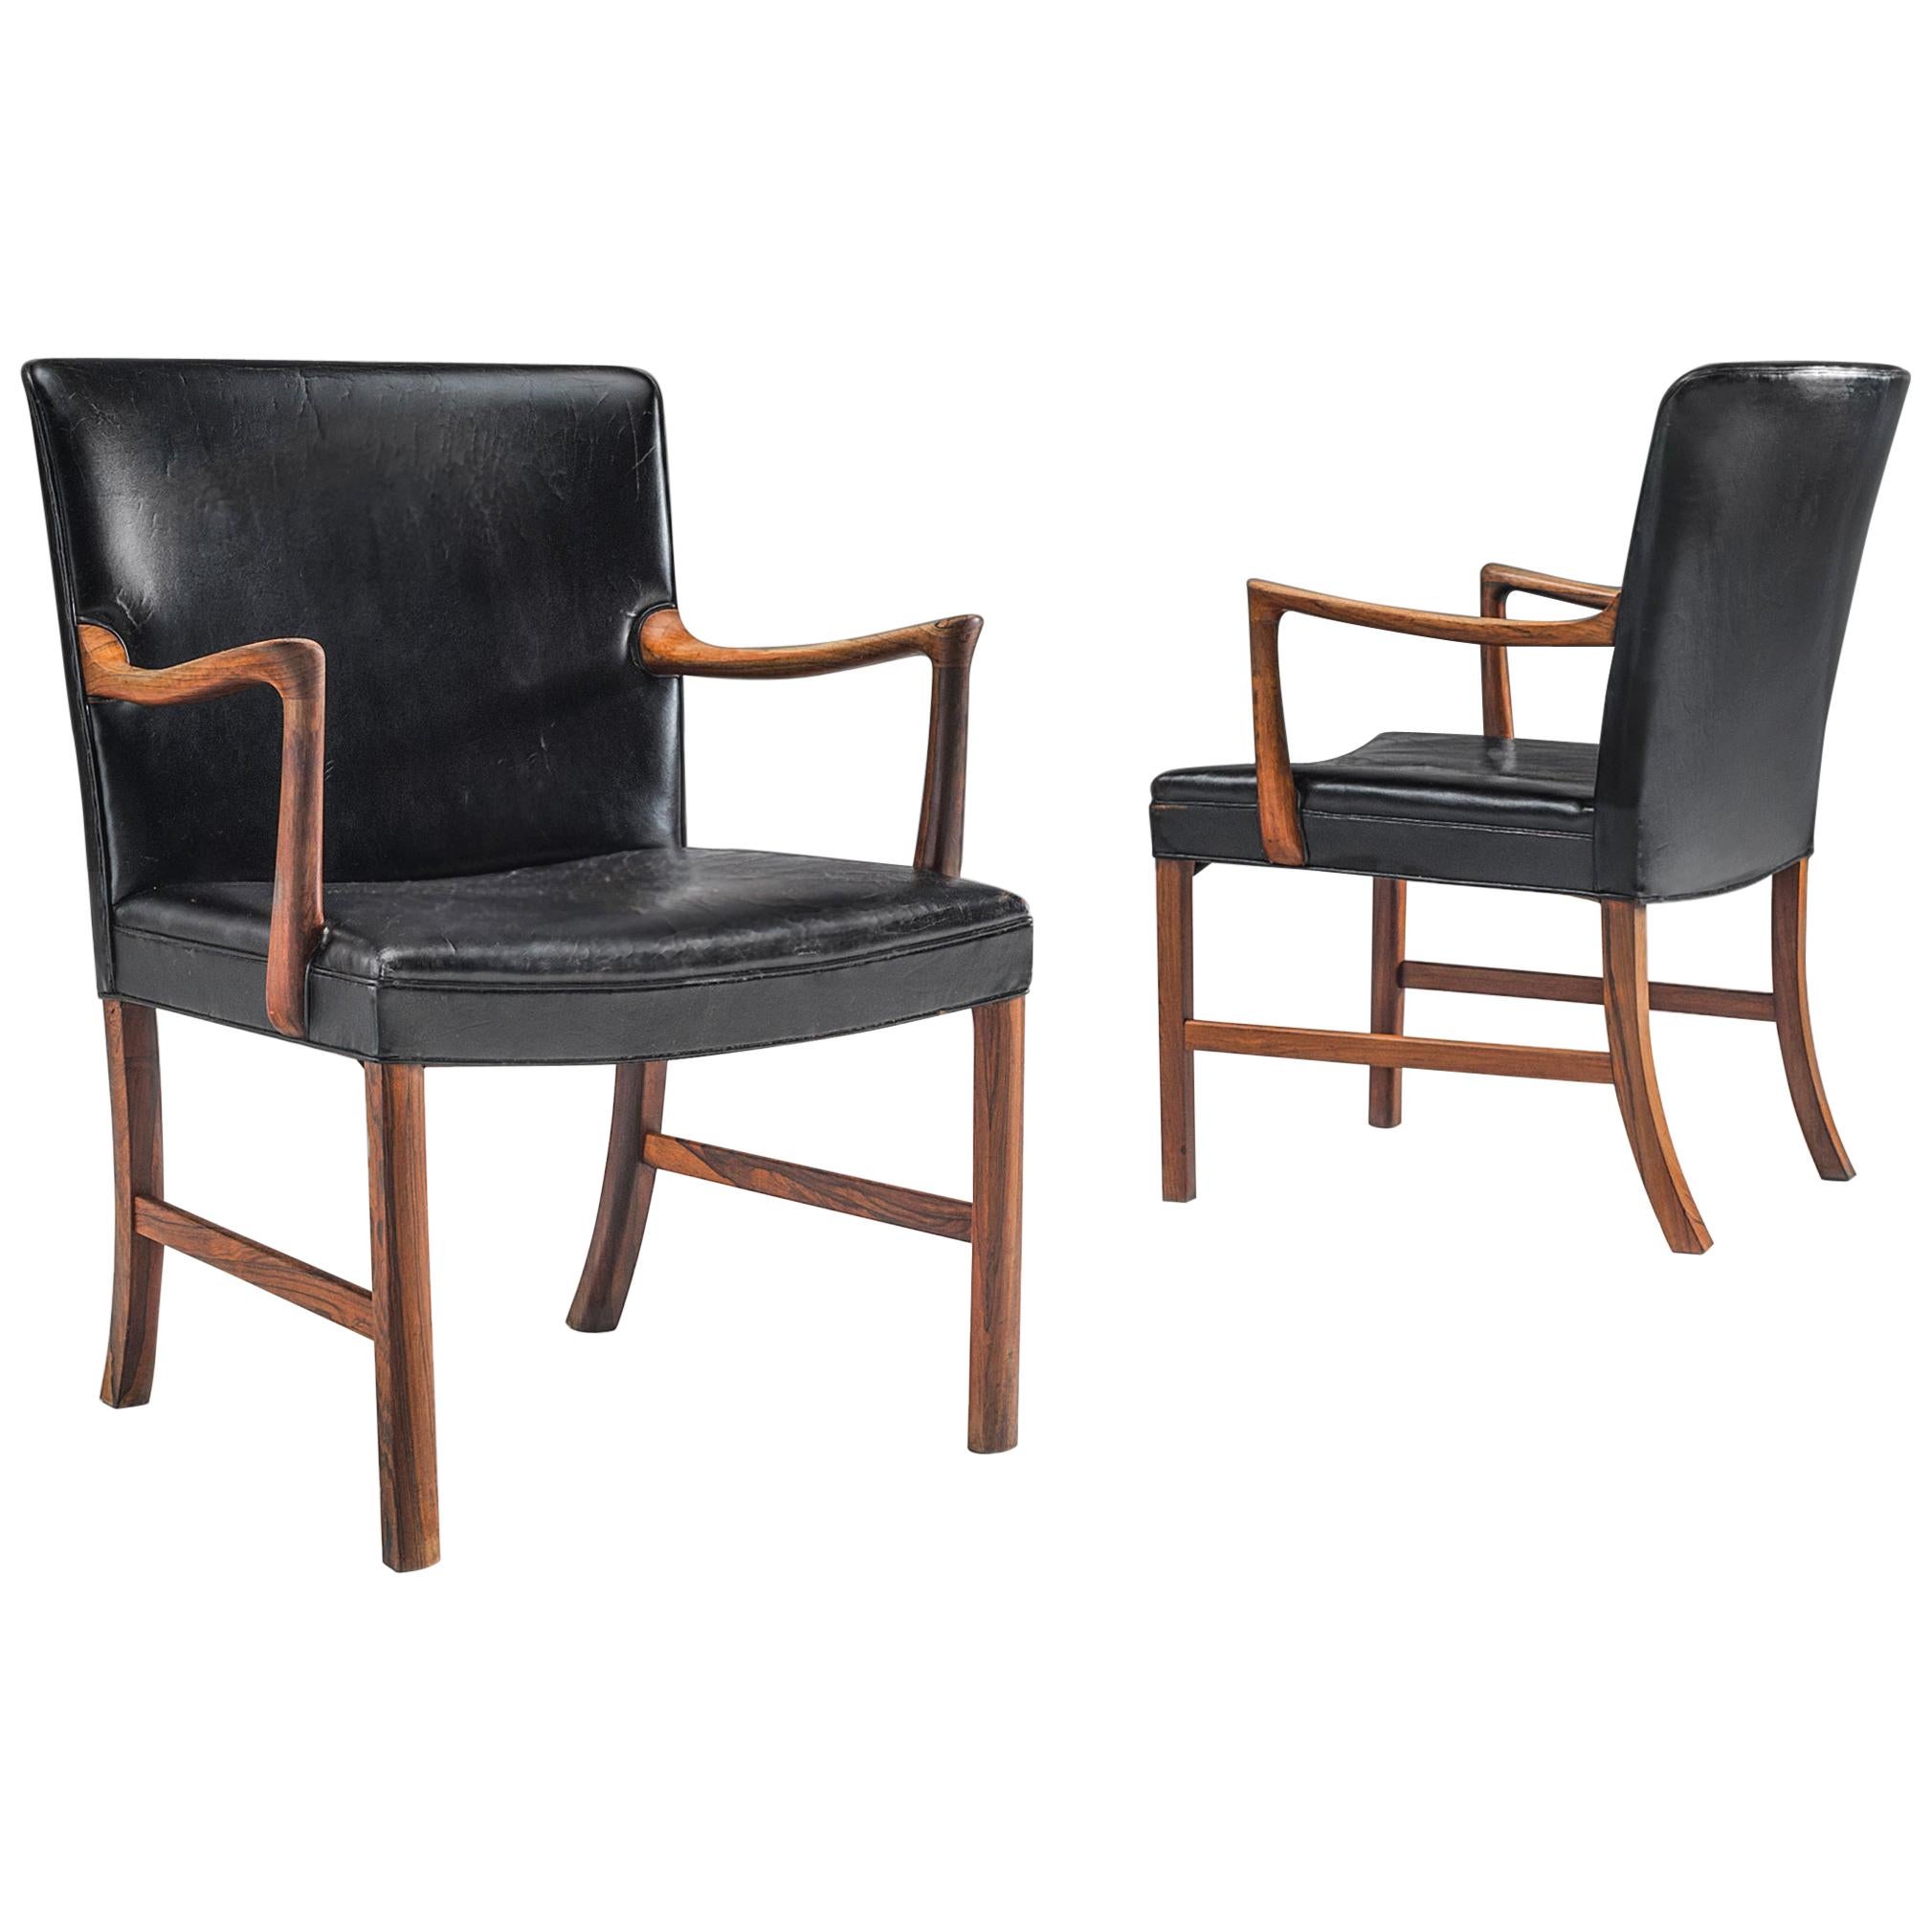 Ole Wanscher Two Armchairs in Black Leather